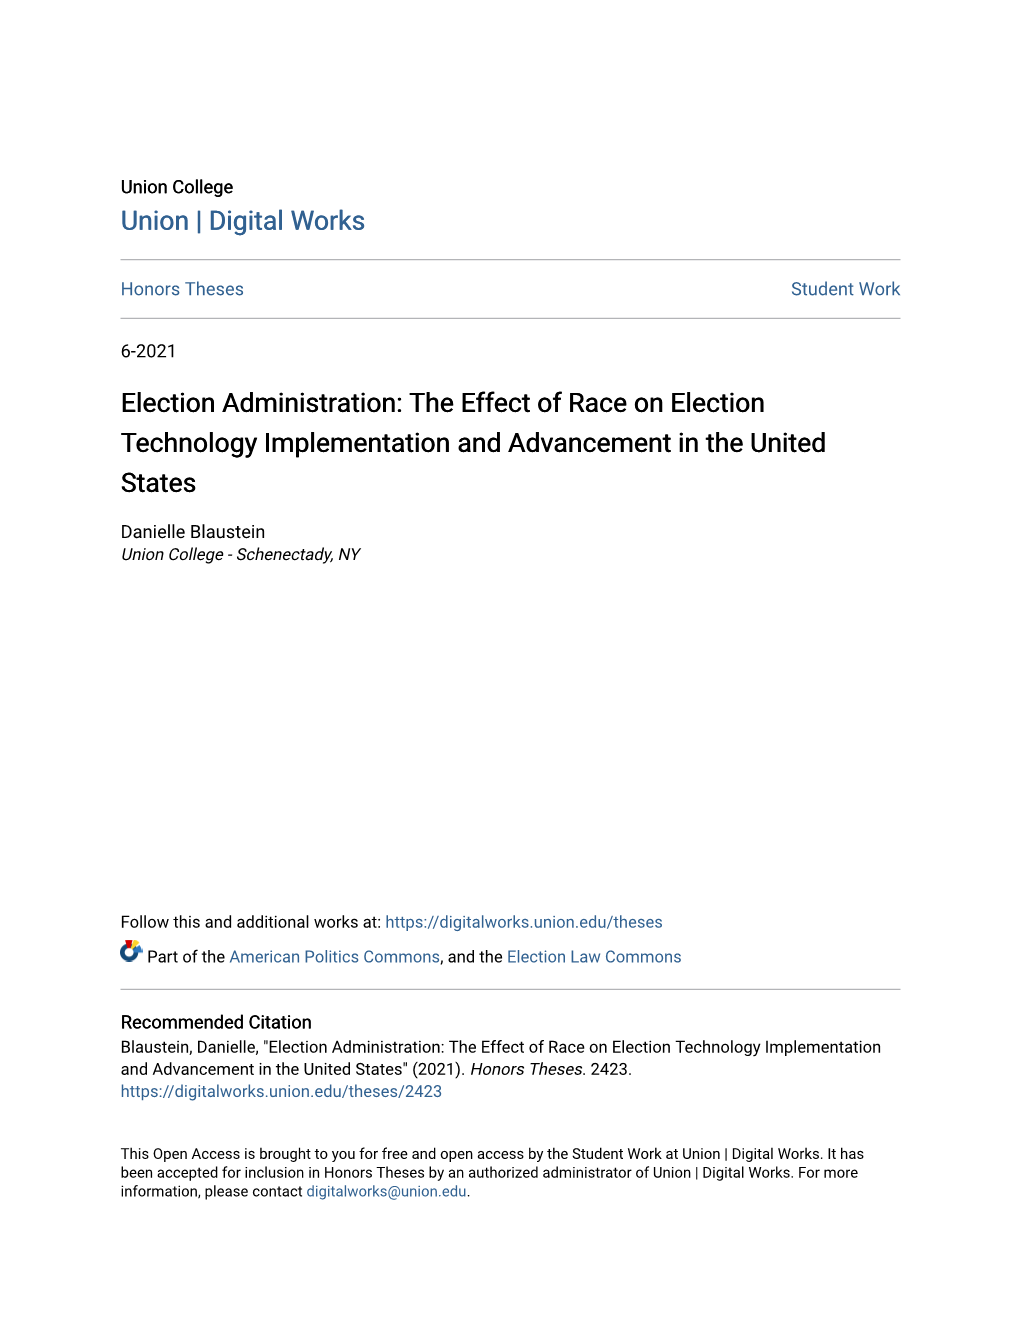 Election Administration: the Effect of Race on Election Technology Implementation and Advancement in the United States